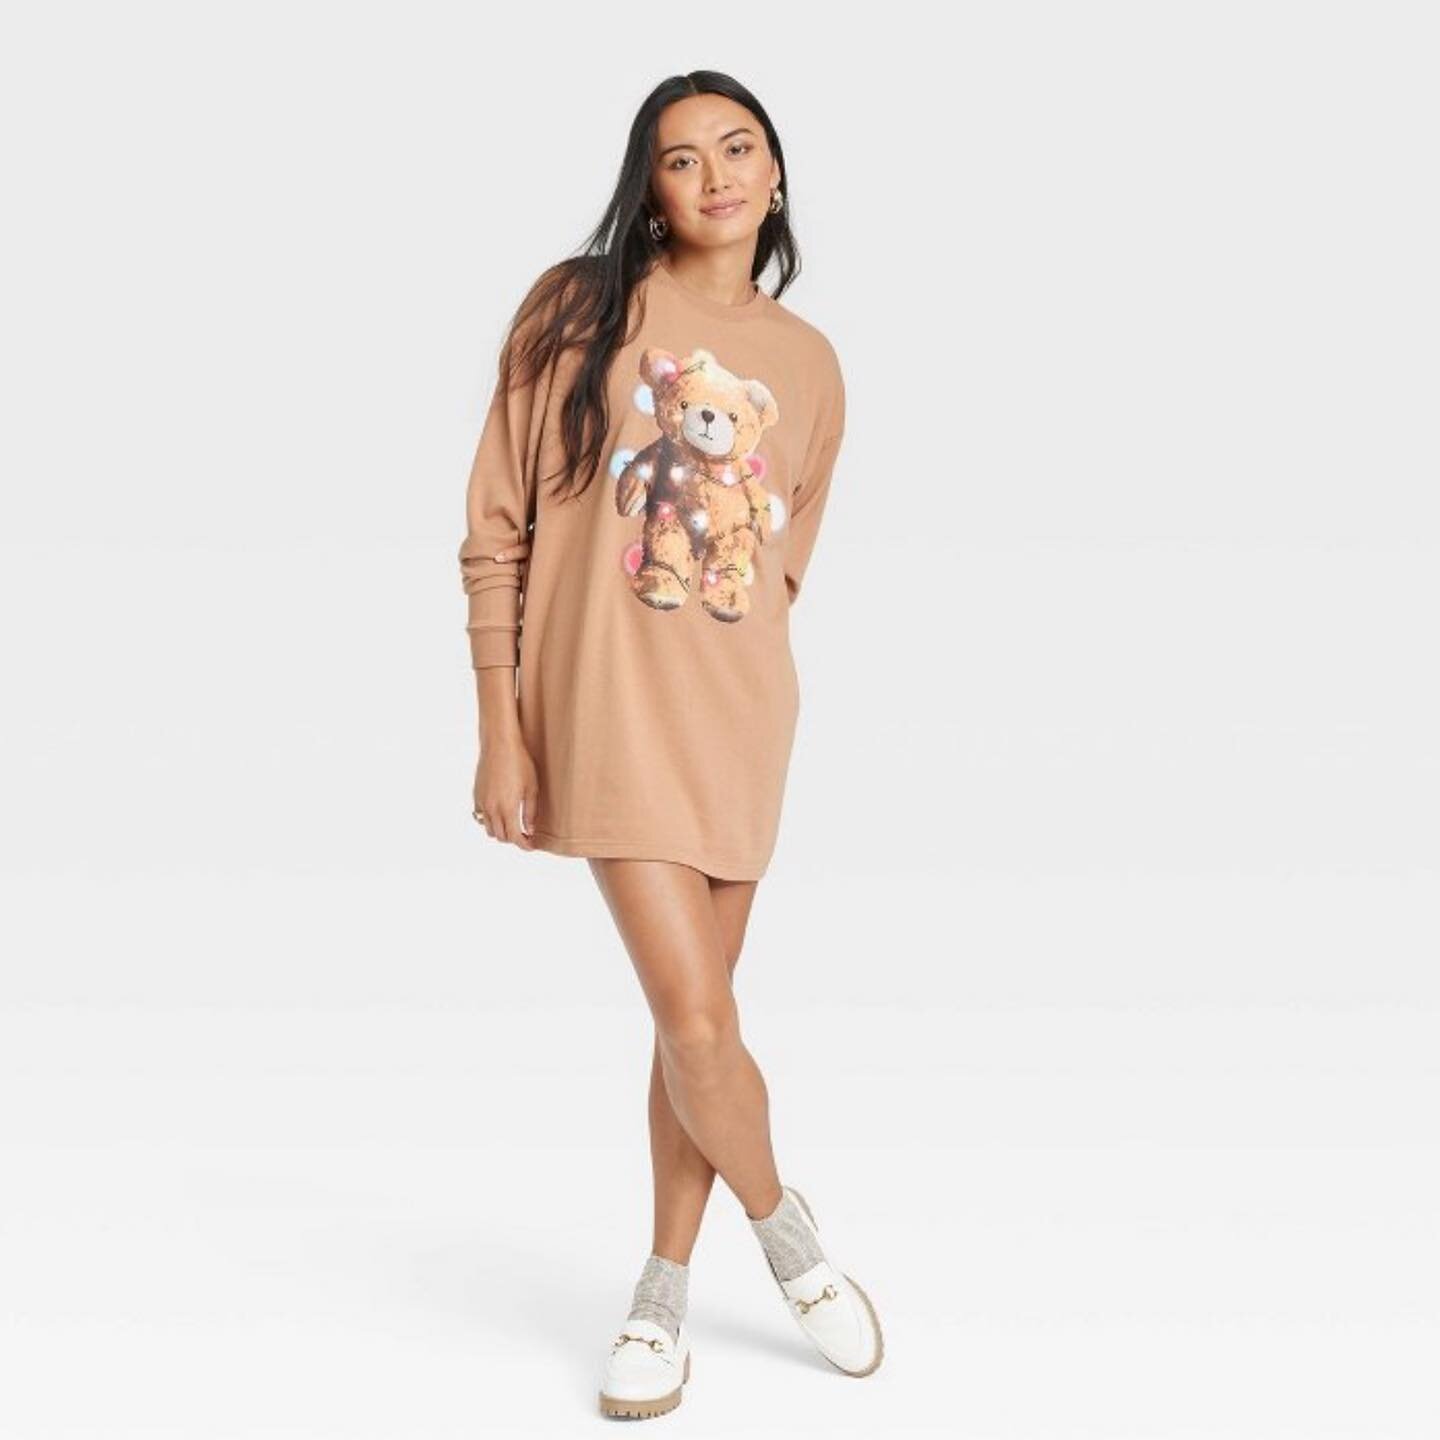 we need this tshirt dress for our casual holiday events 

tag us wearing your @graysonthreads 
shop Grayson Threads at Target.com or in Select Stores 
#graysonthreads #style #ootd #holidayoufit #winterfashion #targetstyle #target